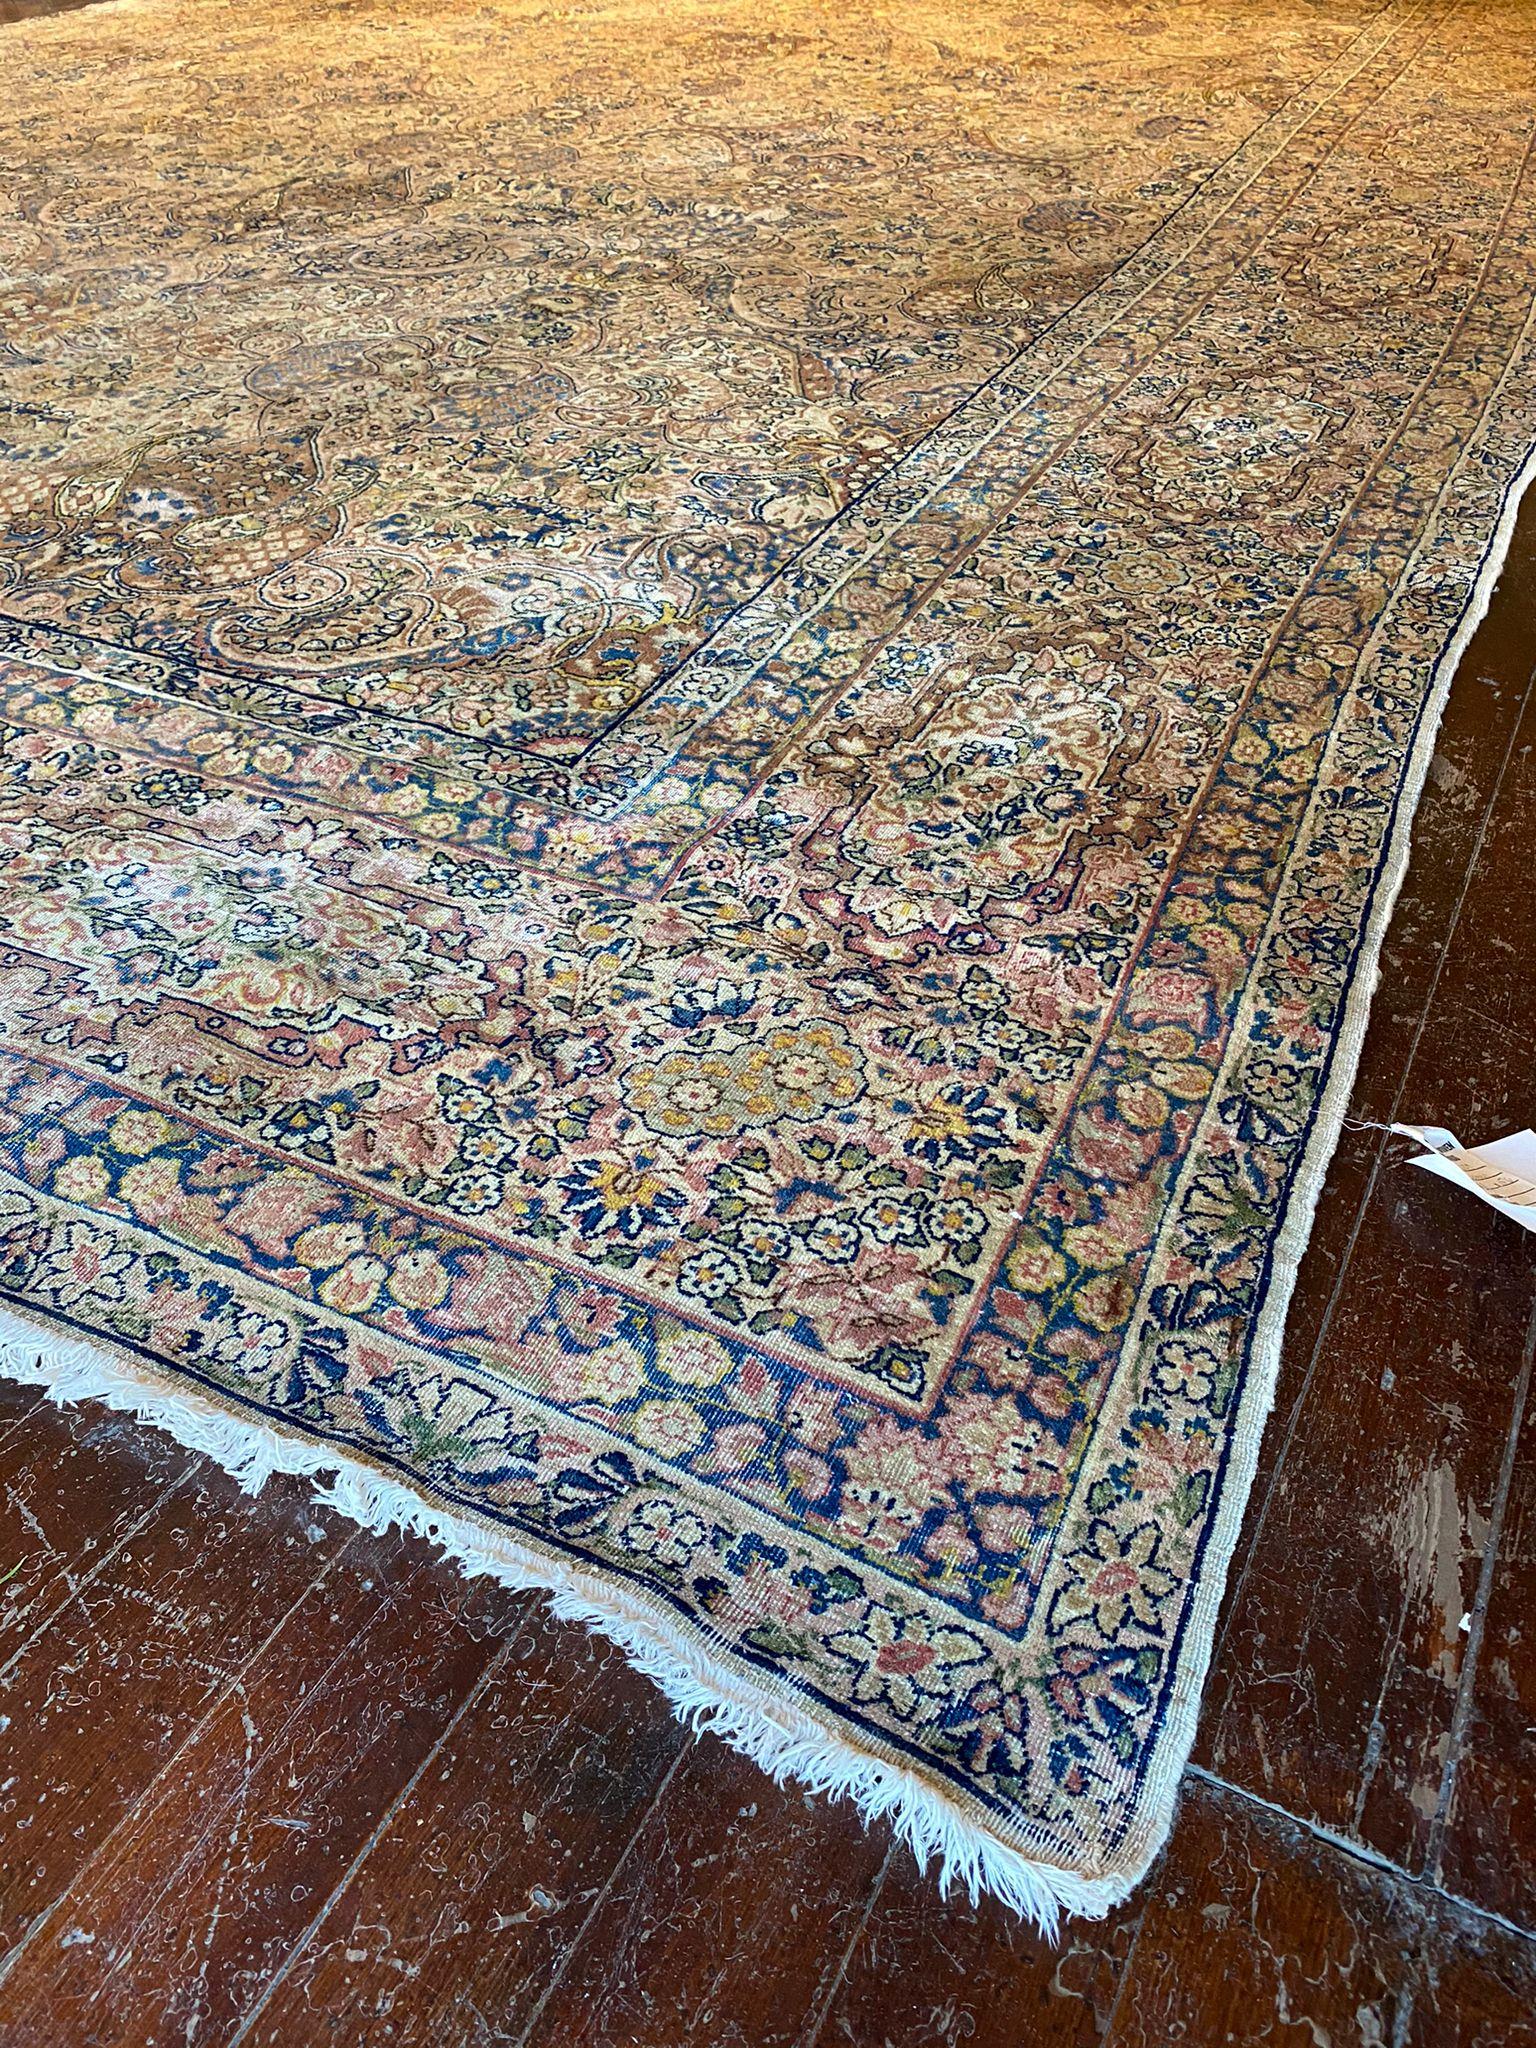 This Kerman Persian rug boasts a classic and intricate design that is characteristic of Persian craftsmanship. Measuring 11 feet in width by 15 feet 6 inches in length, it is generously sized, making it suitable for larger living spaces or grand